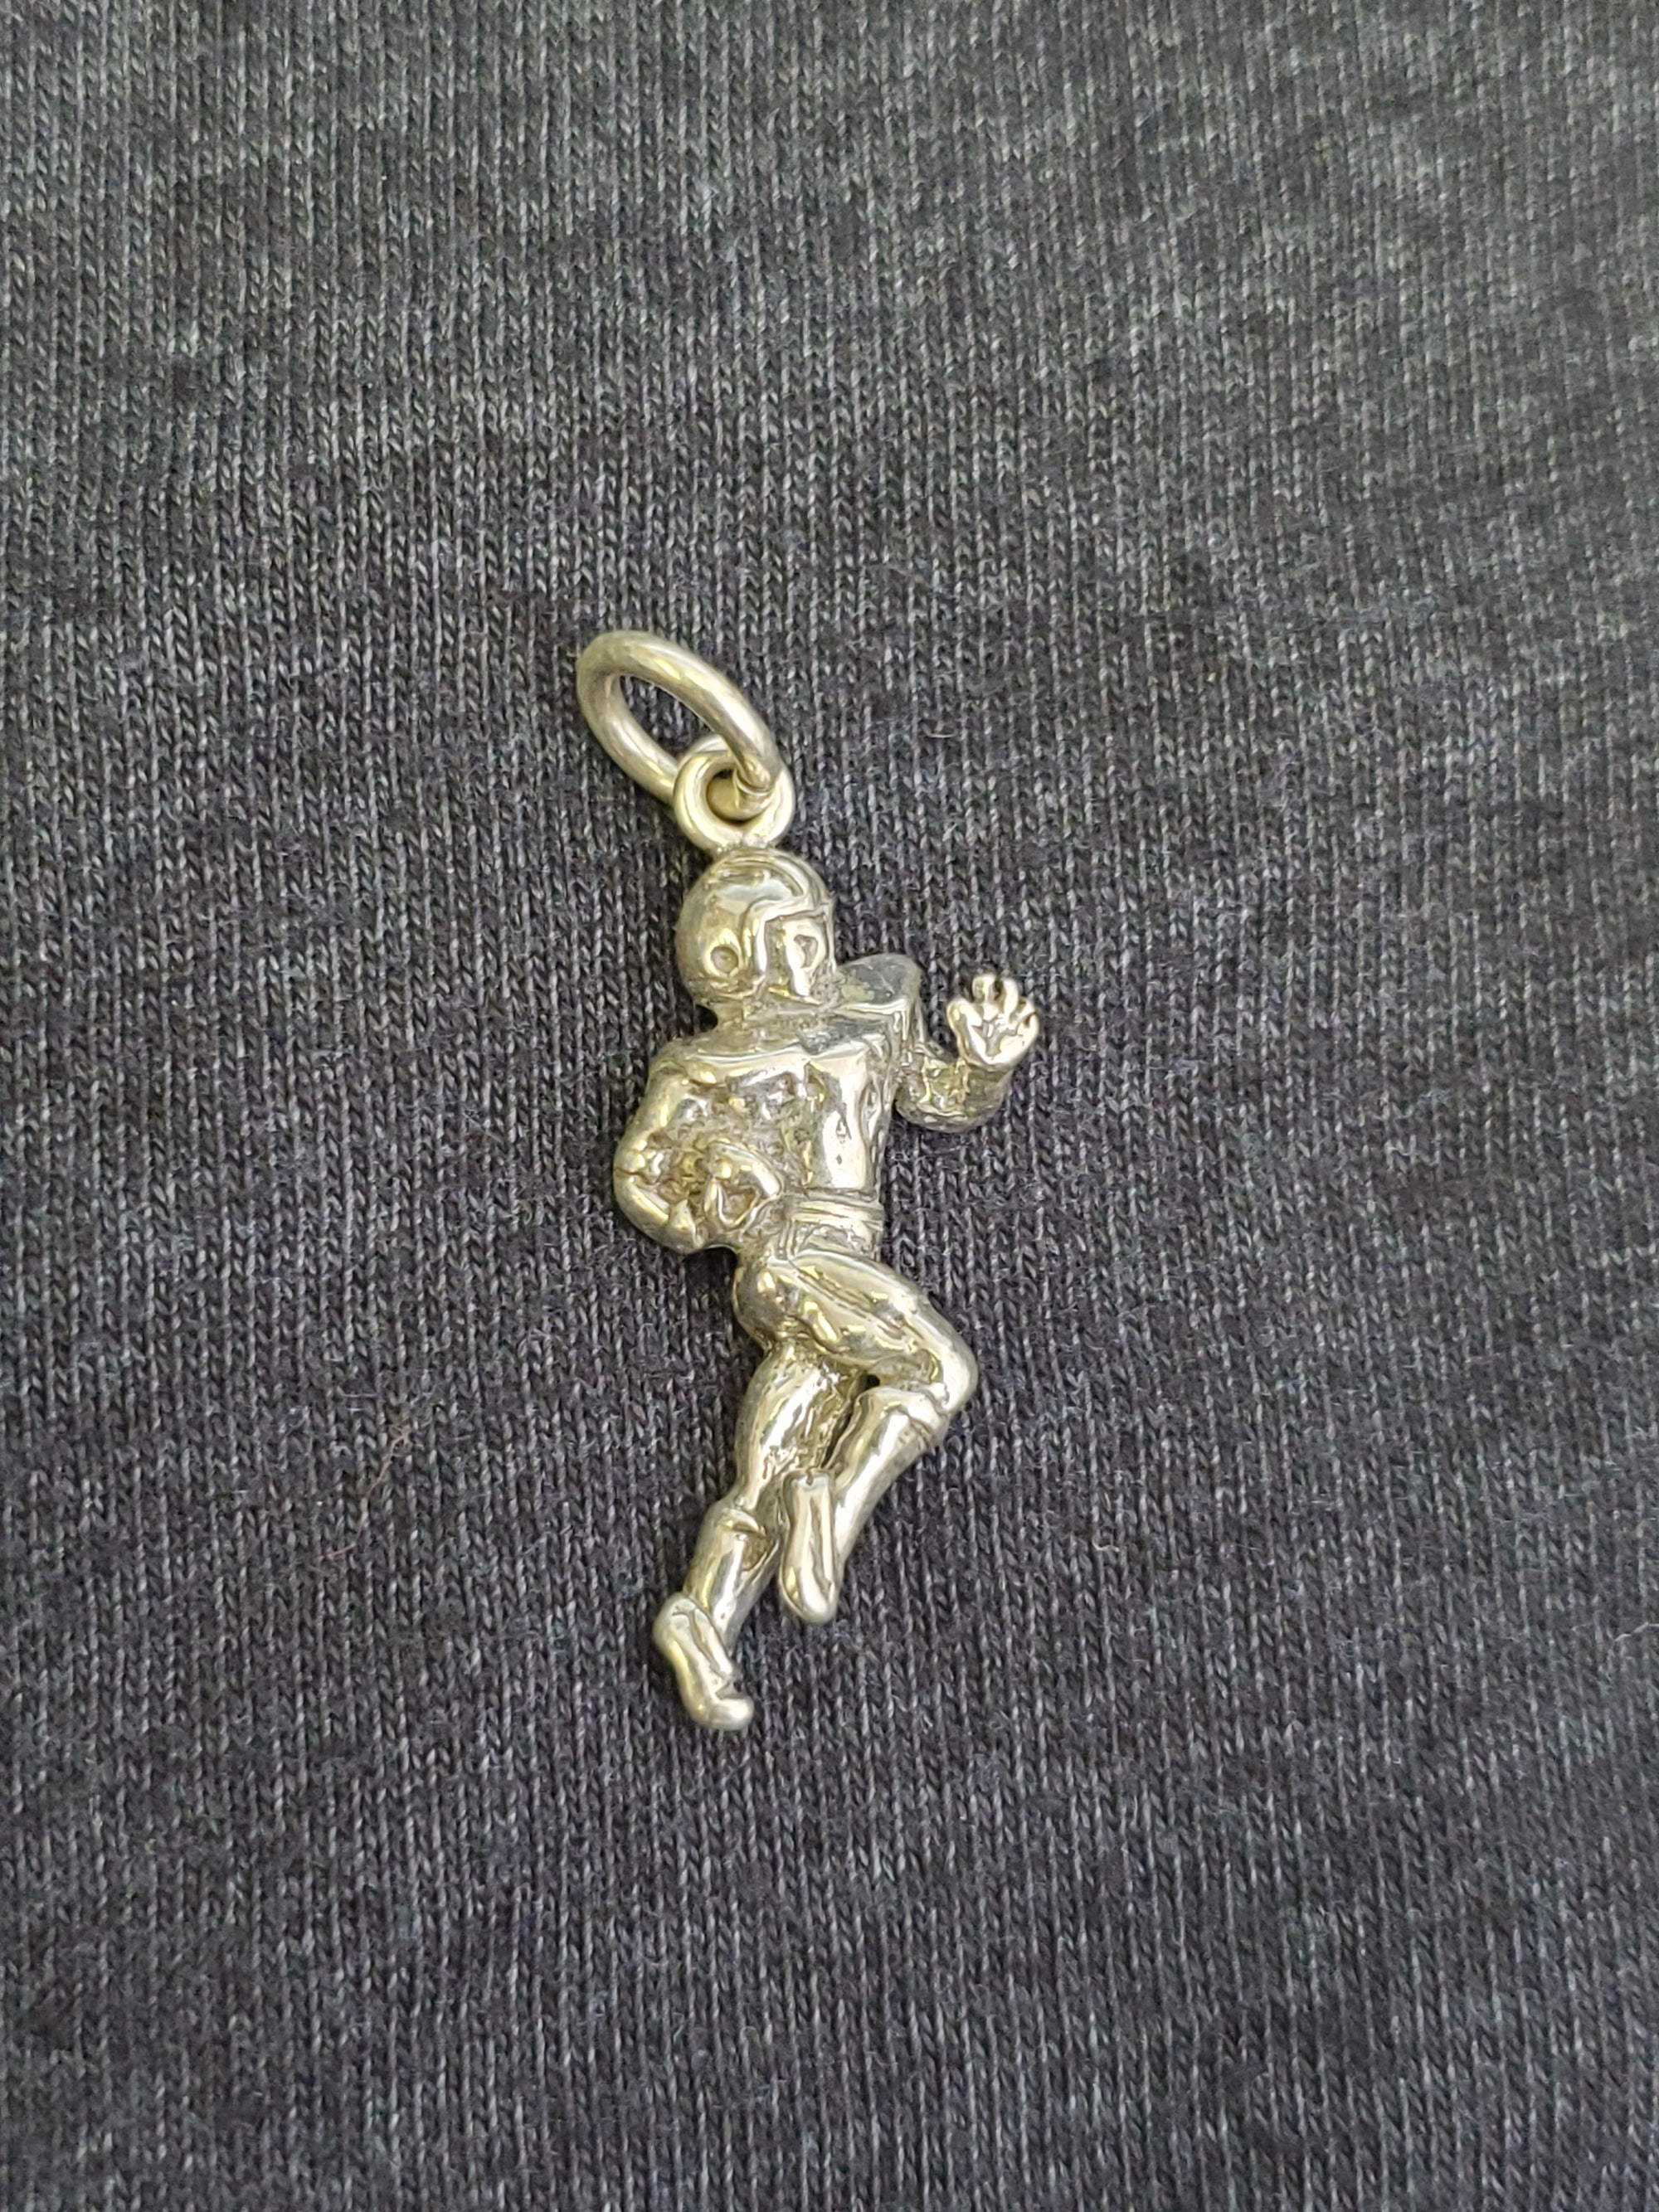 925 Sterling Silver (Made in Italy) American Football Player Charm